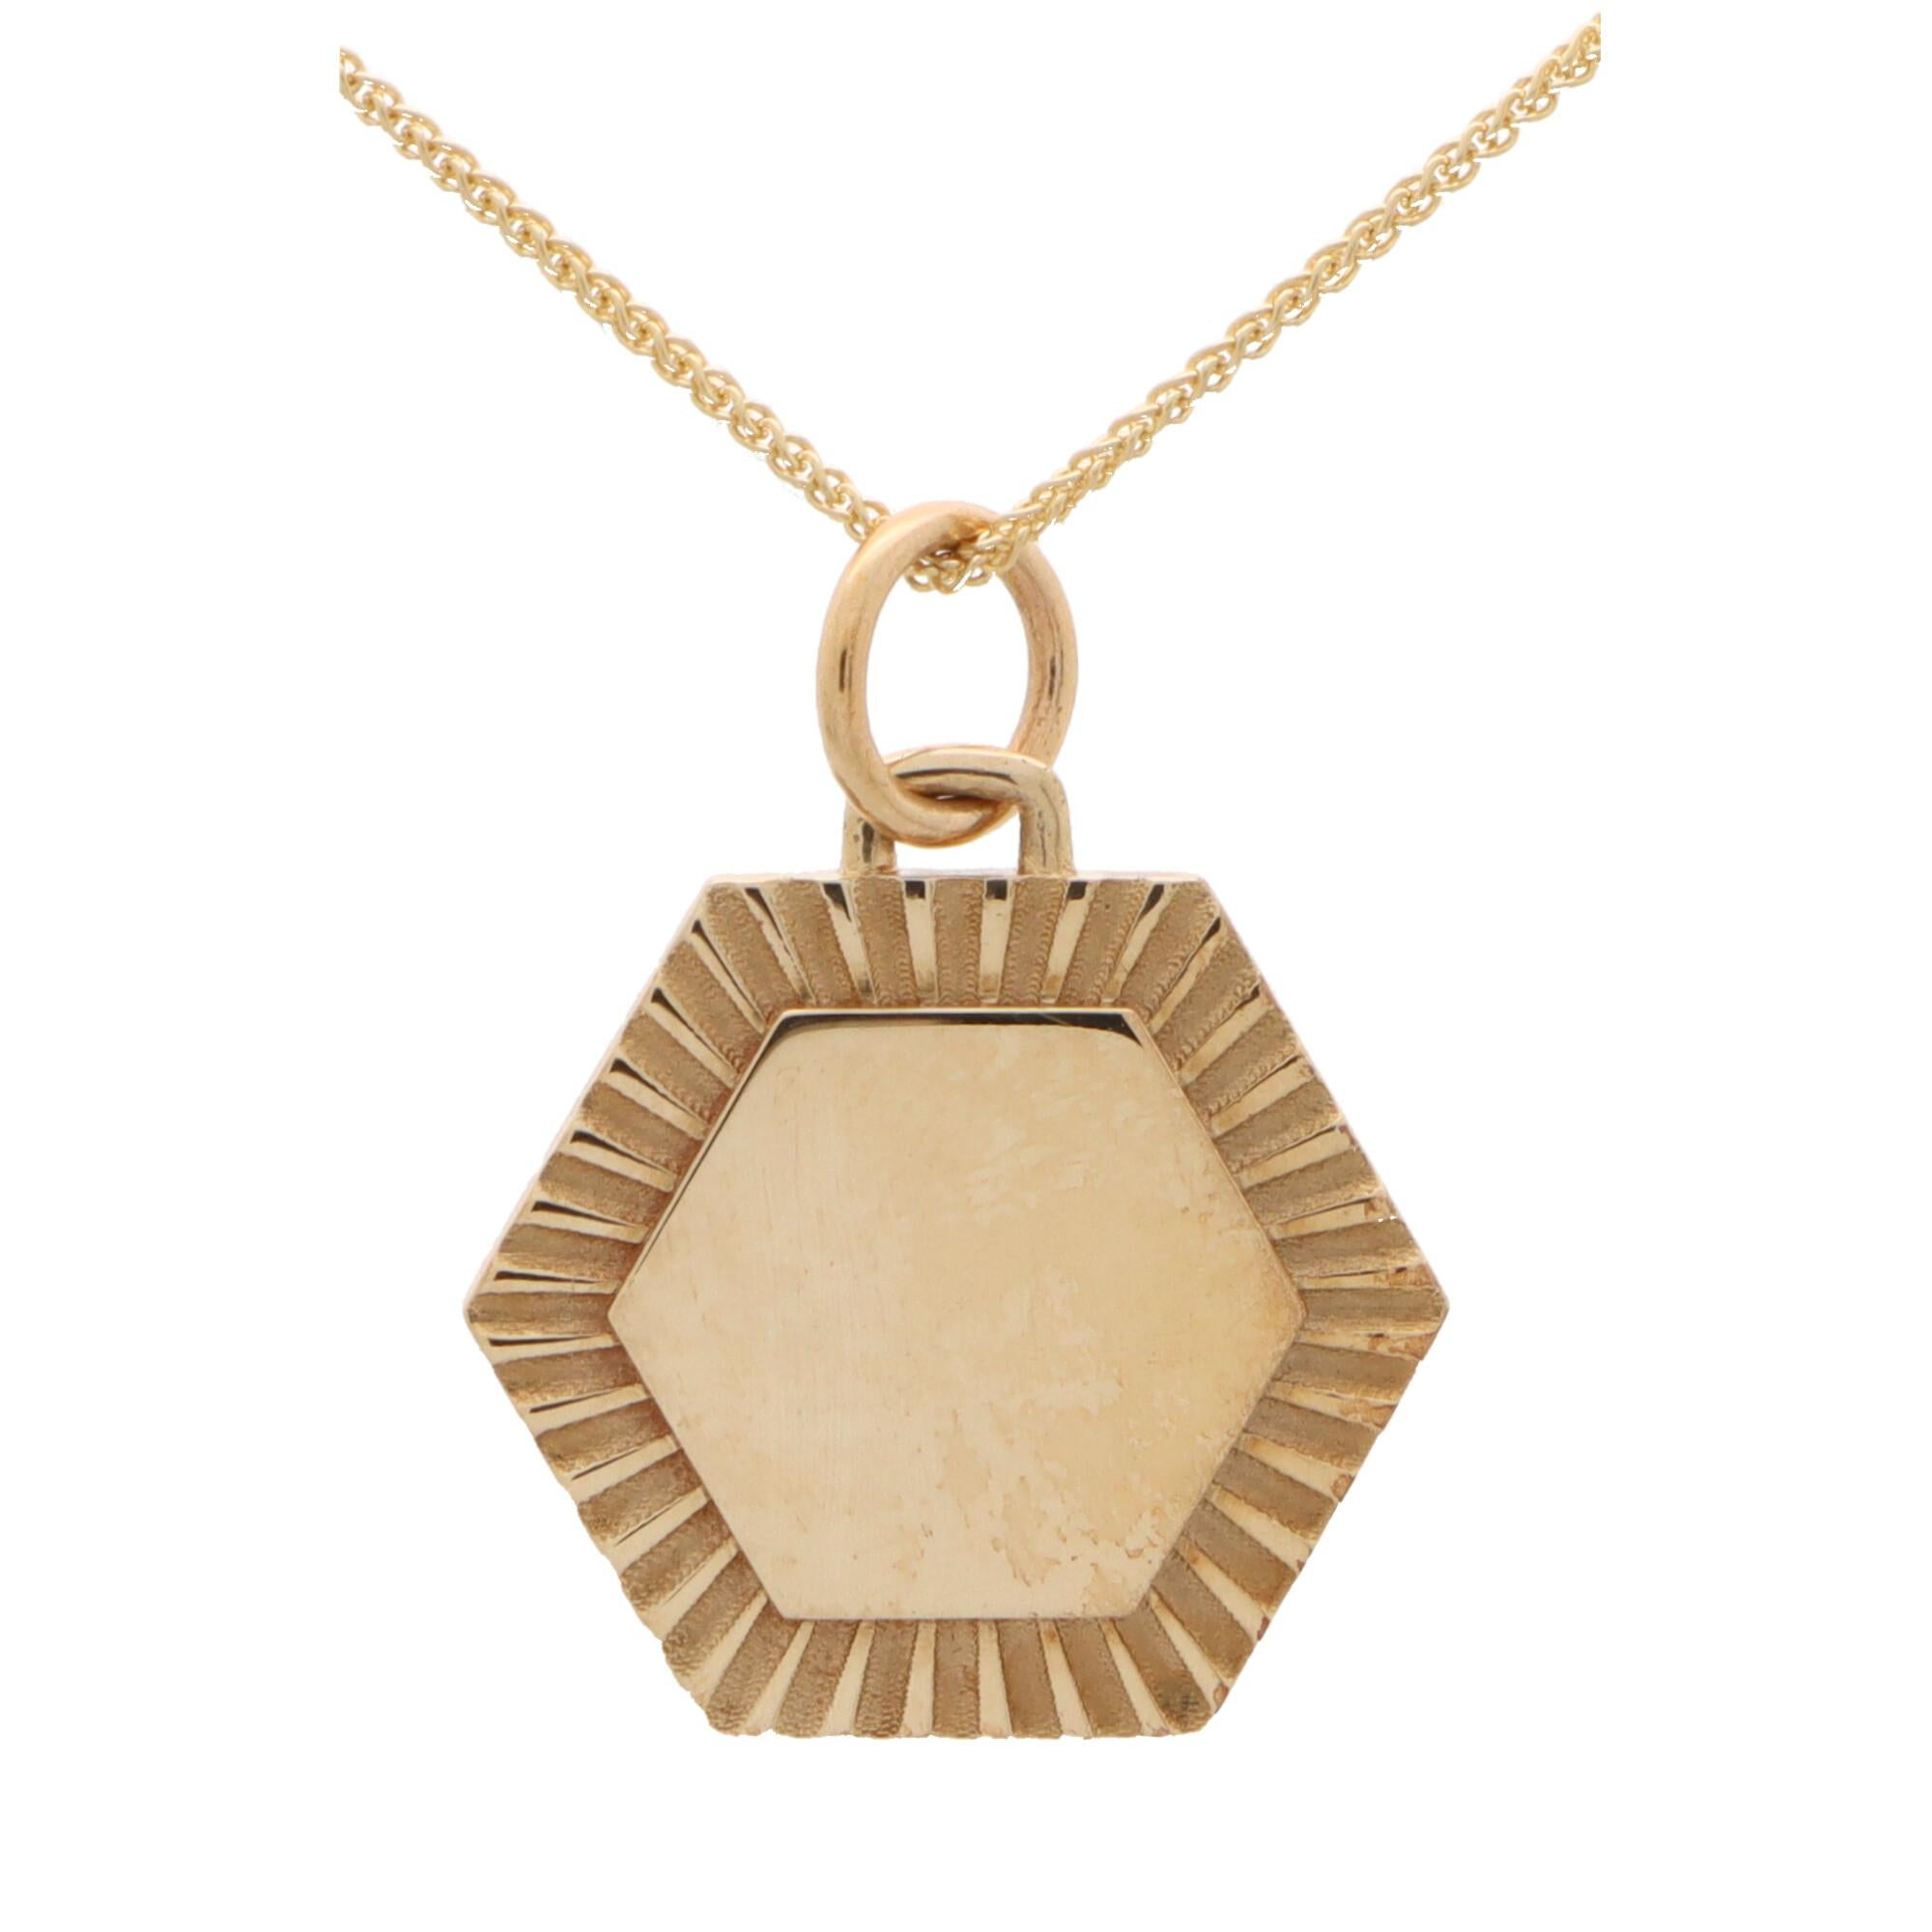 Hexagonal Coin / Disc Pendant Set in Solid 9k Gold In New Condition For Sale In London, GB